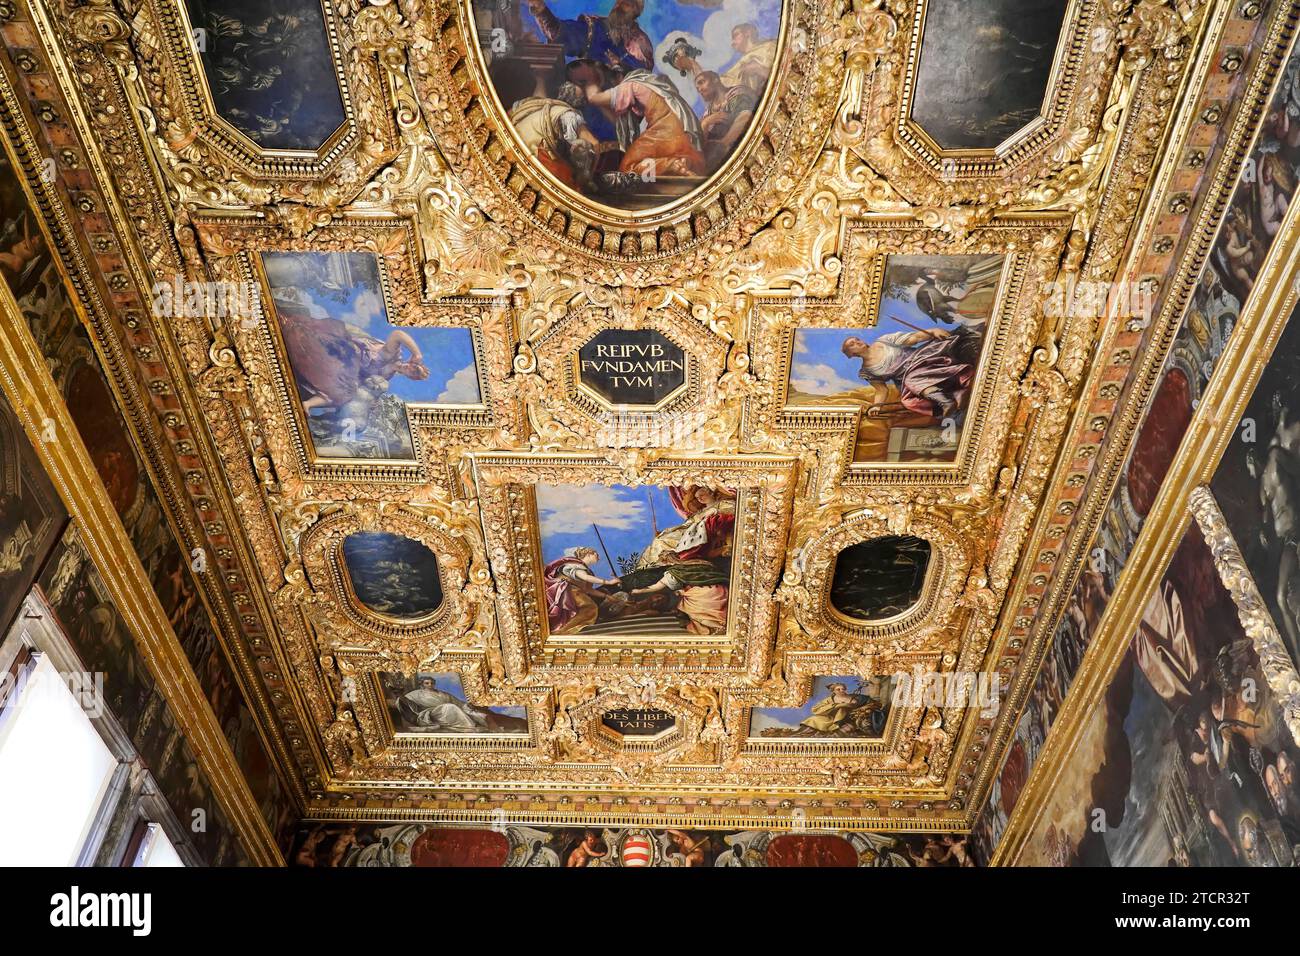 Decorated ceiling, fresco and ceiling painting, interior view, Doge's Palace, Palazzo Ducale, Venice, Veneto, Italy Stock Photo